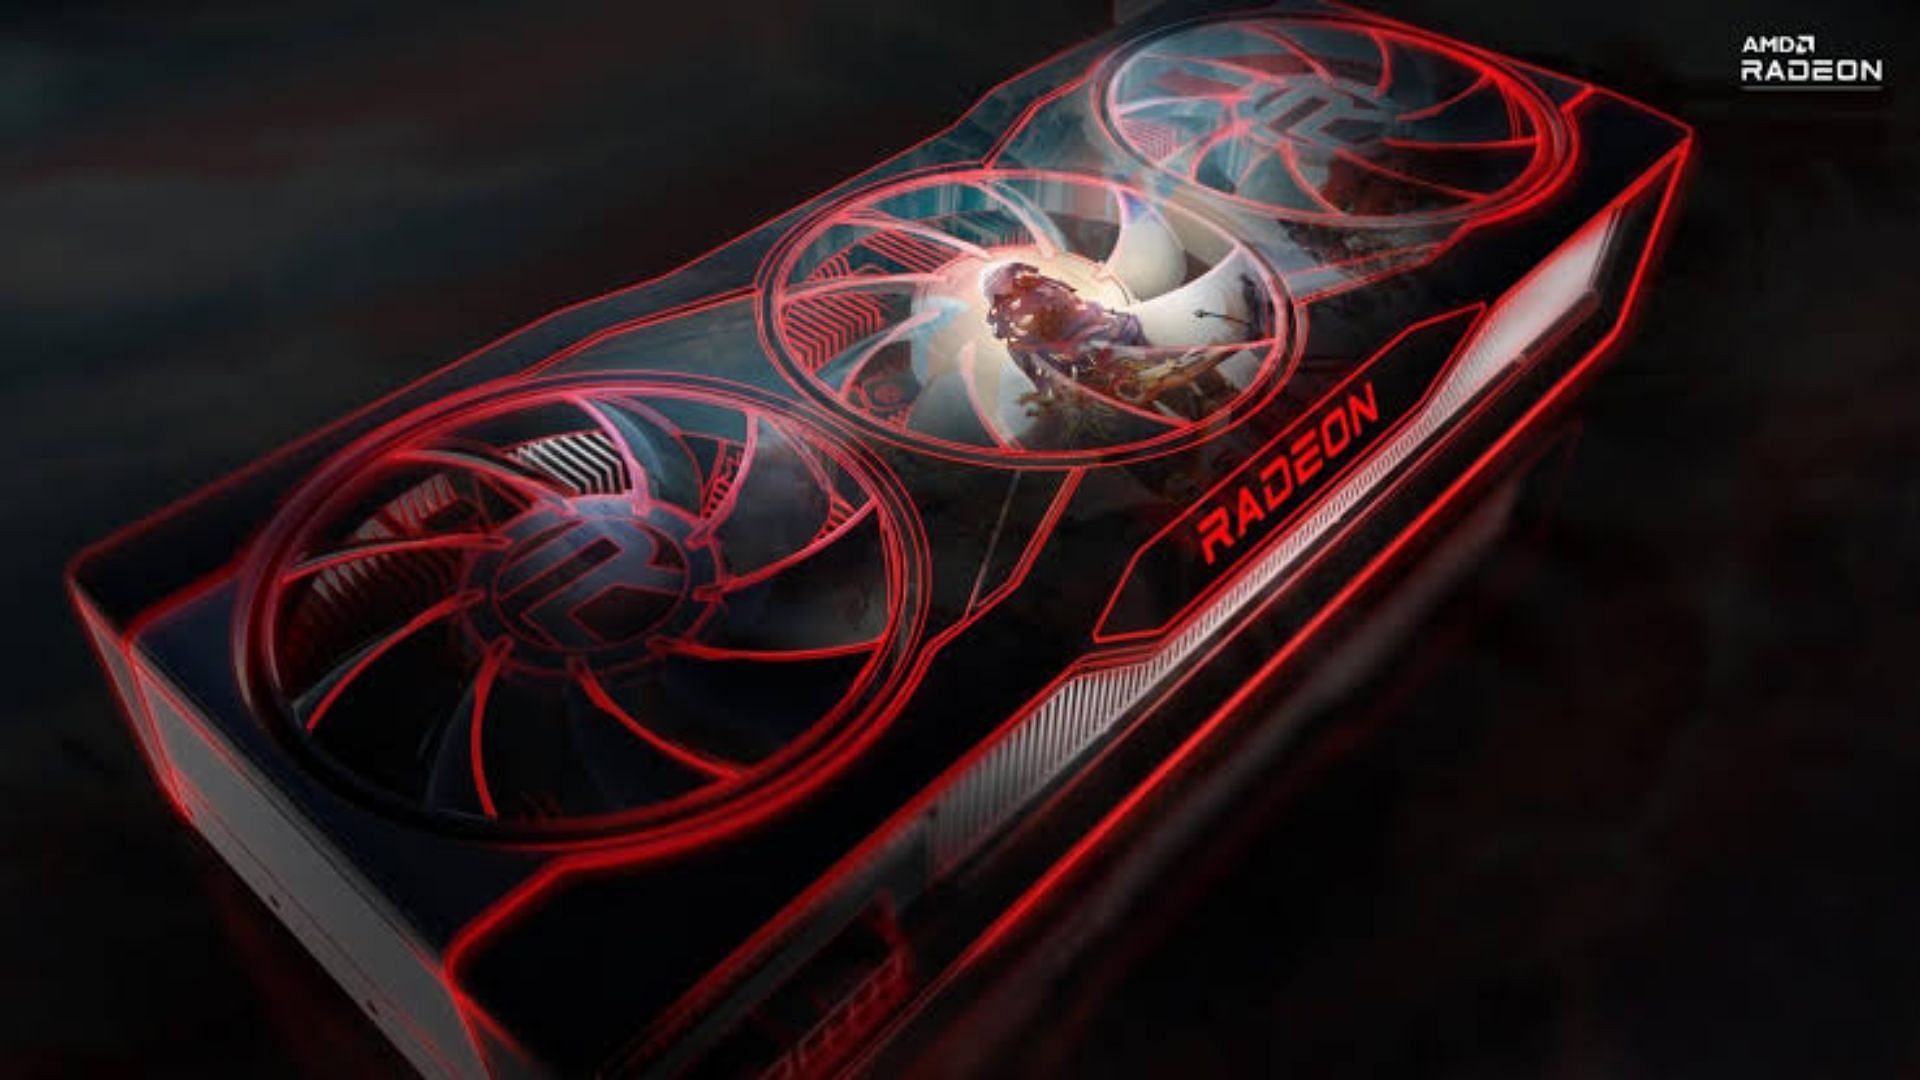 A render of a Radeon reference card (Image via Twitter/TechyPreacher)